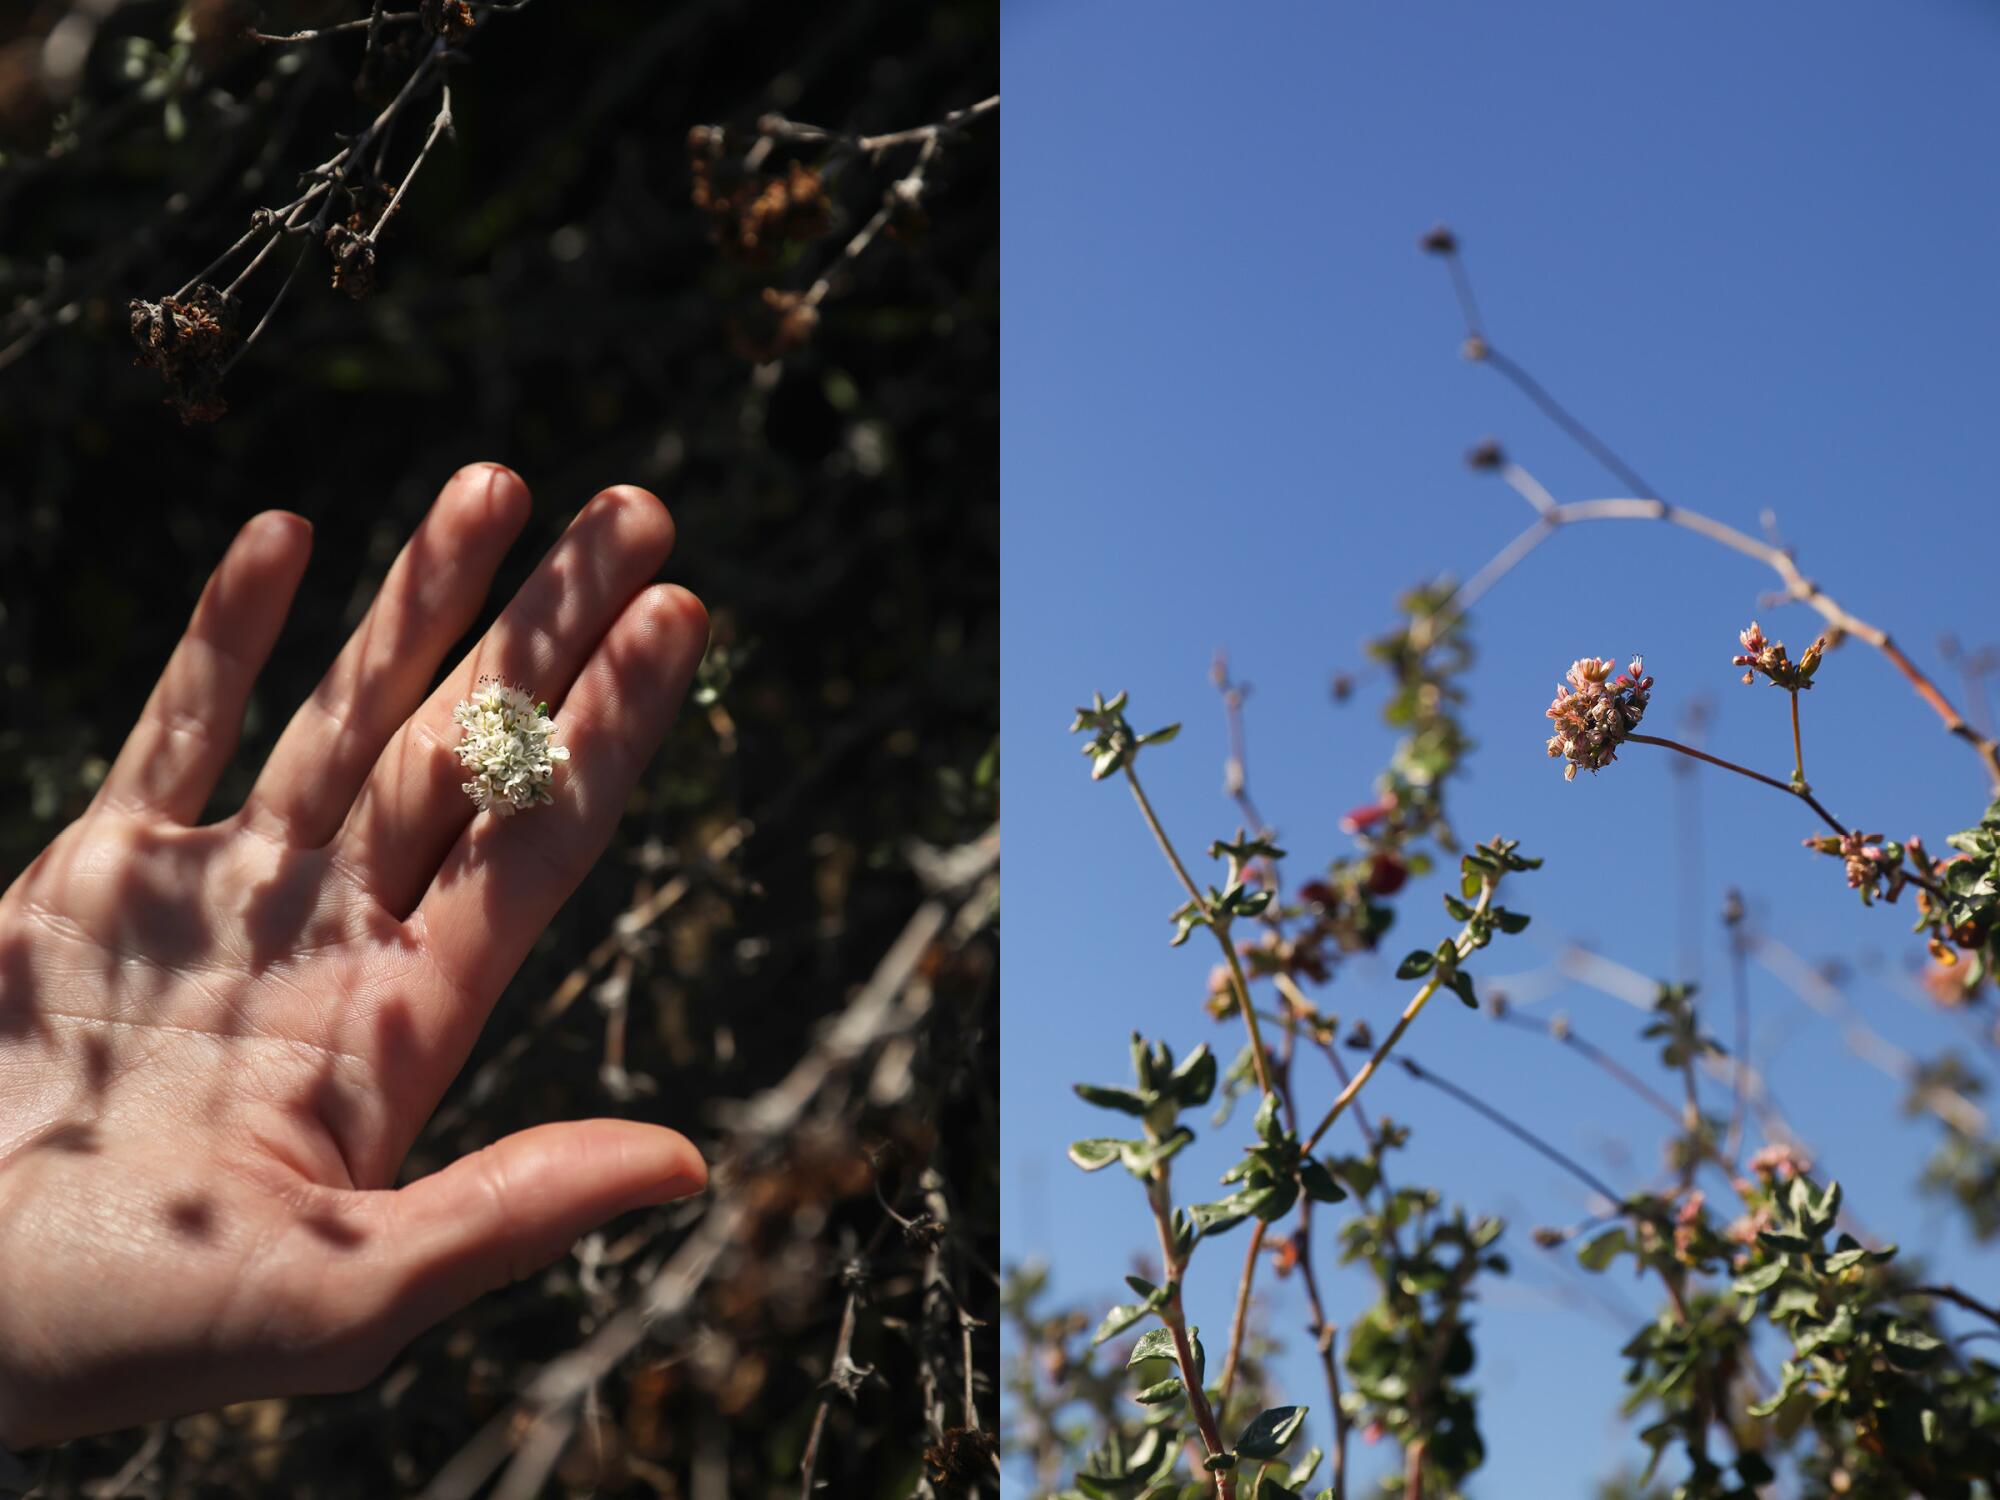 Two photos side by side, one showing a hand holding a white flower and the other a low-angle view of pink flowers and sky